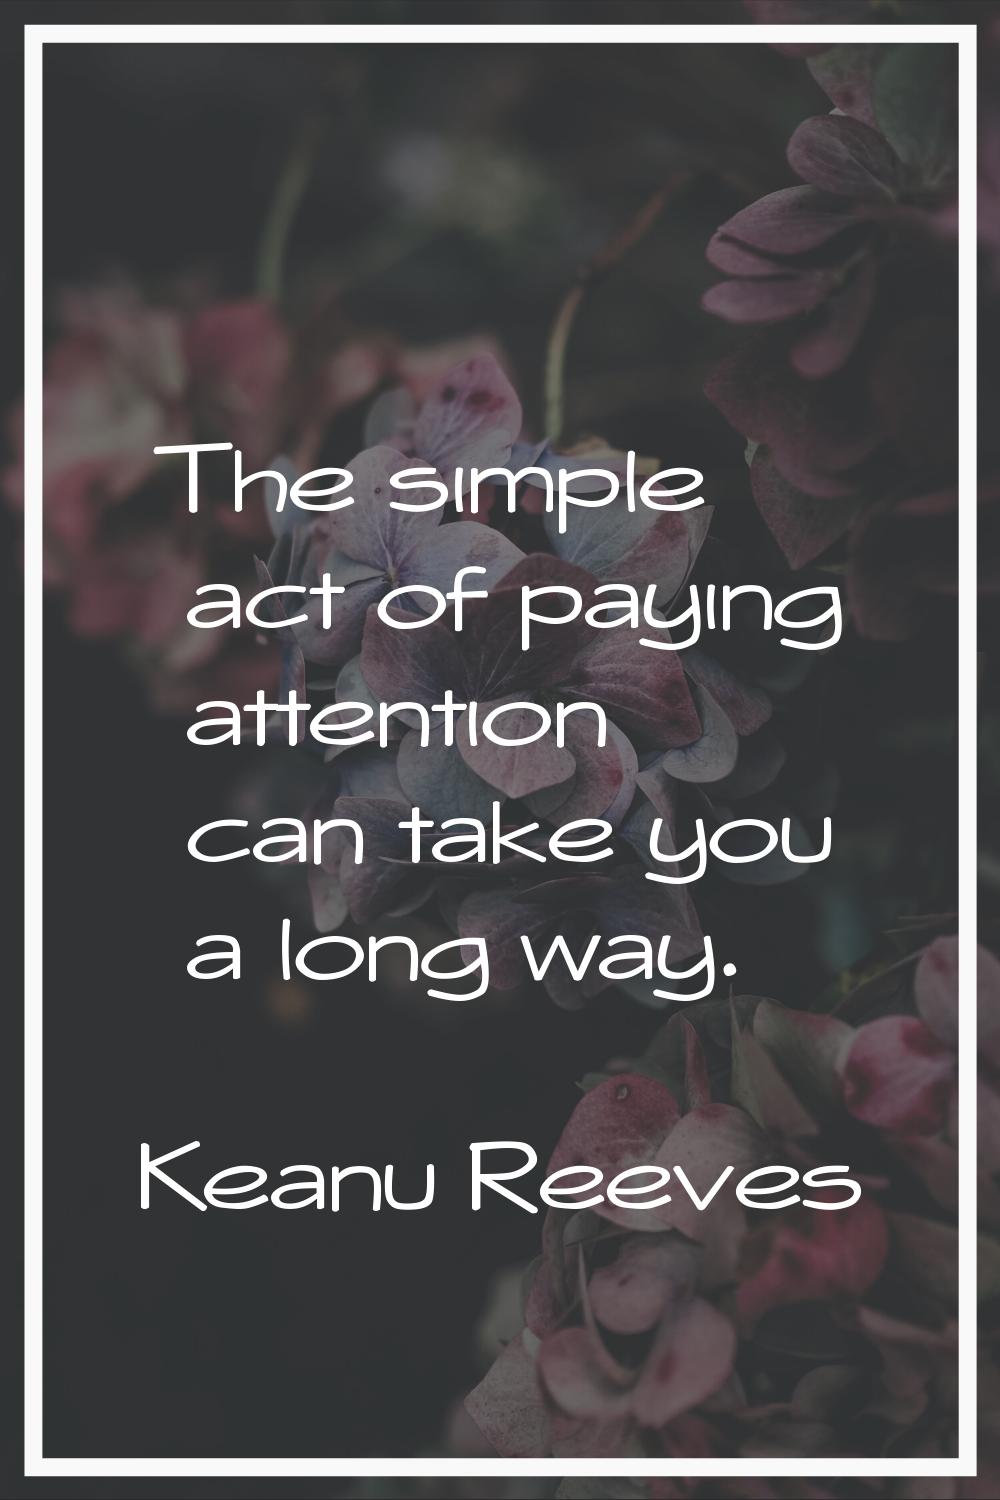 The simple act of paying attention can take you a long way.